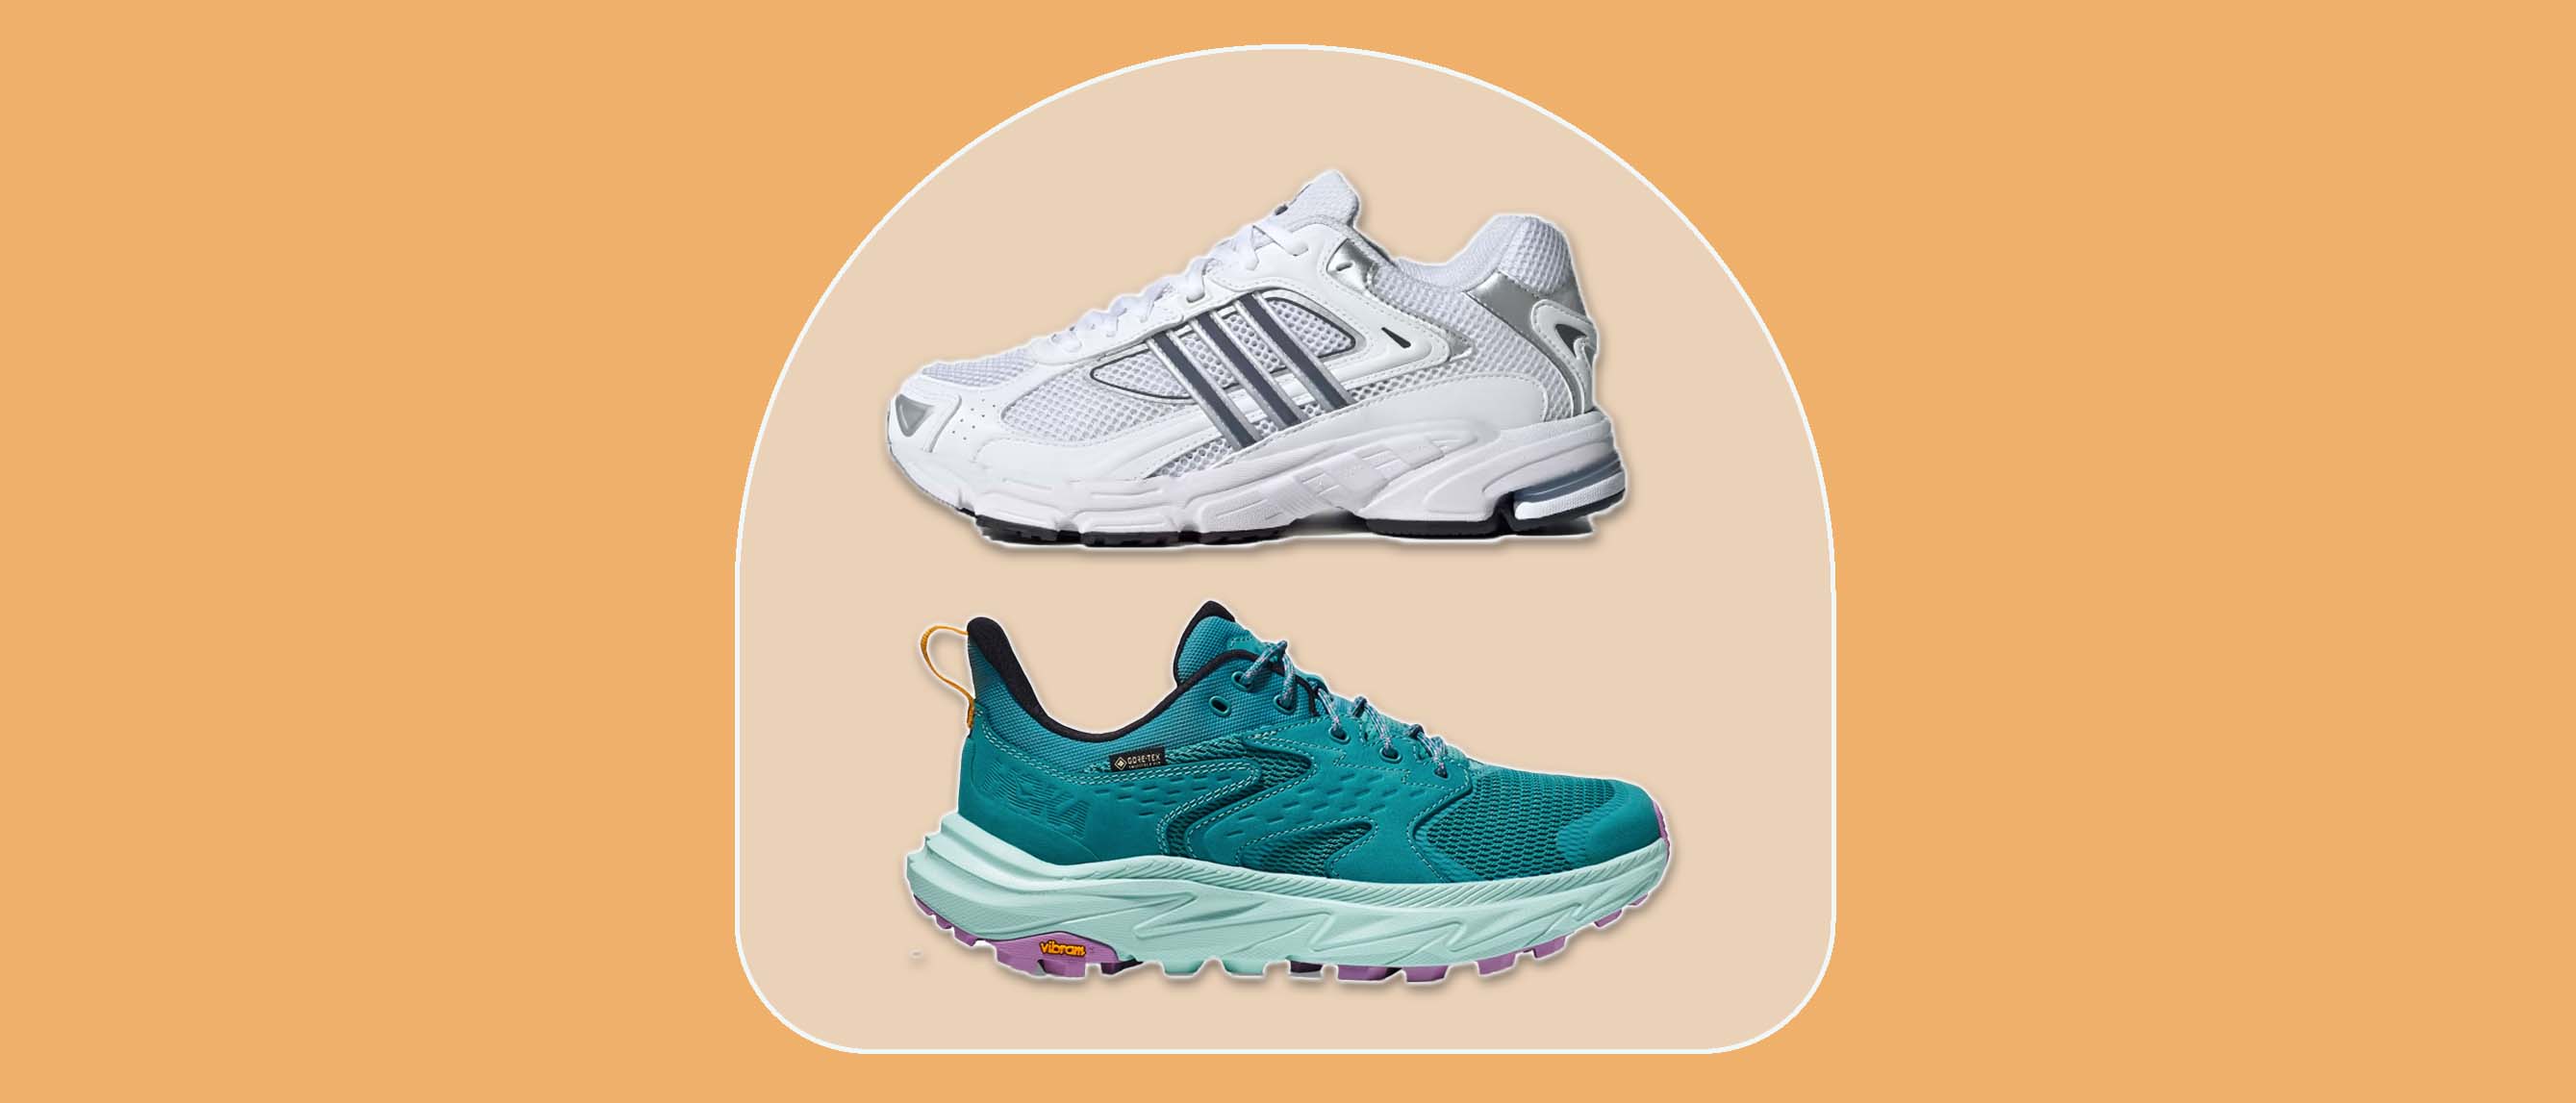 Comfortable women's walking shoes for wide feet - Reviewed